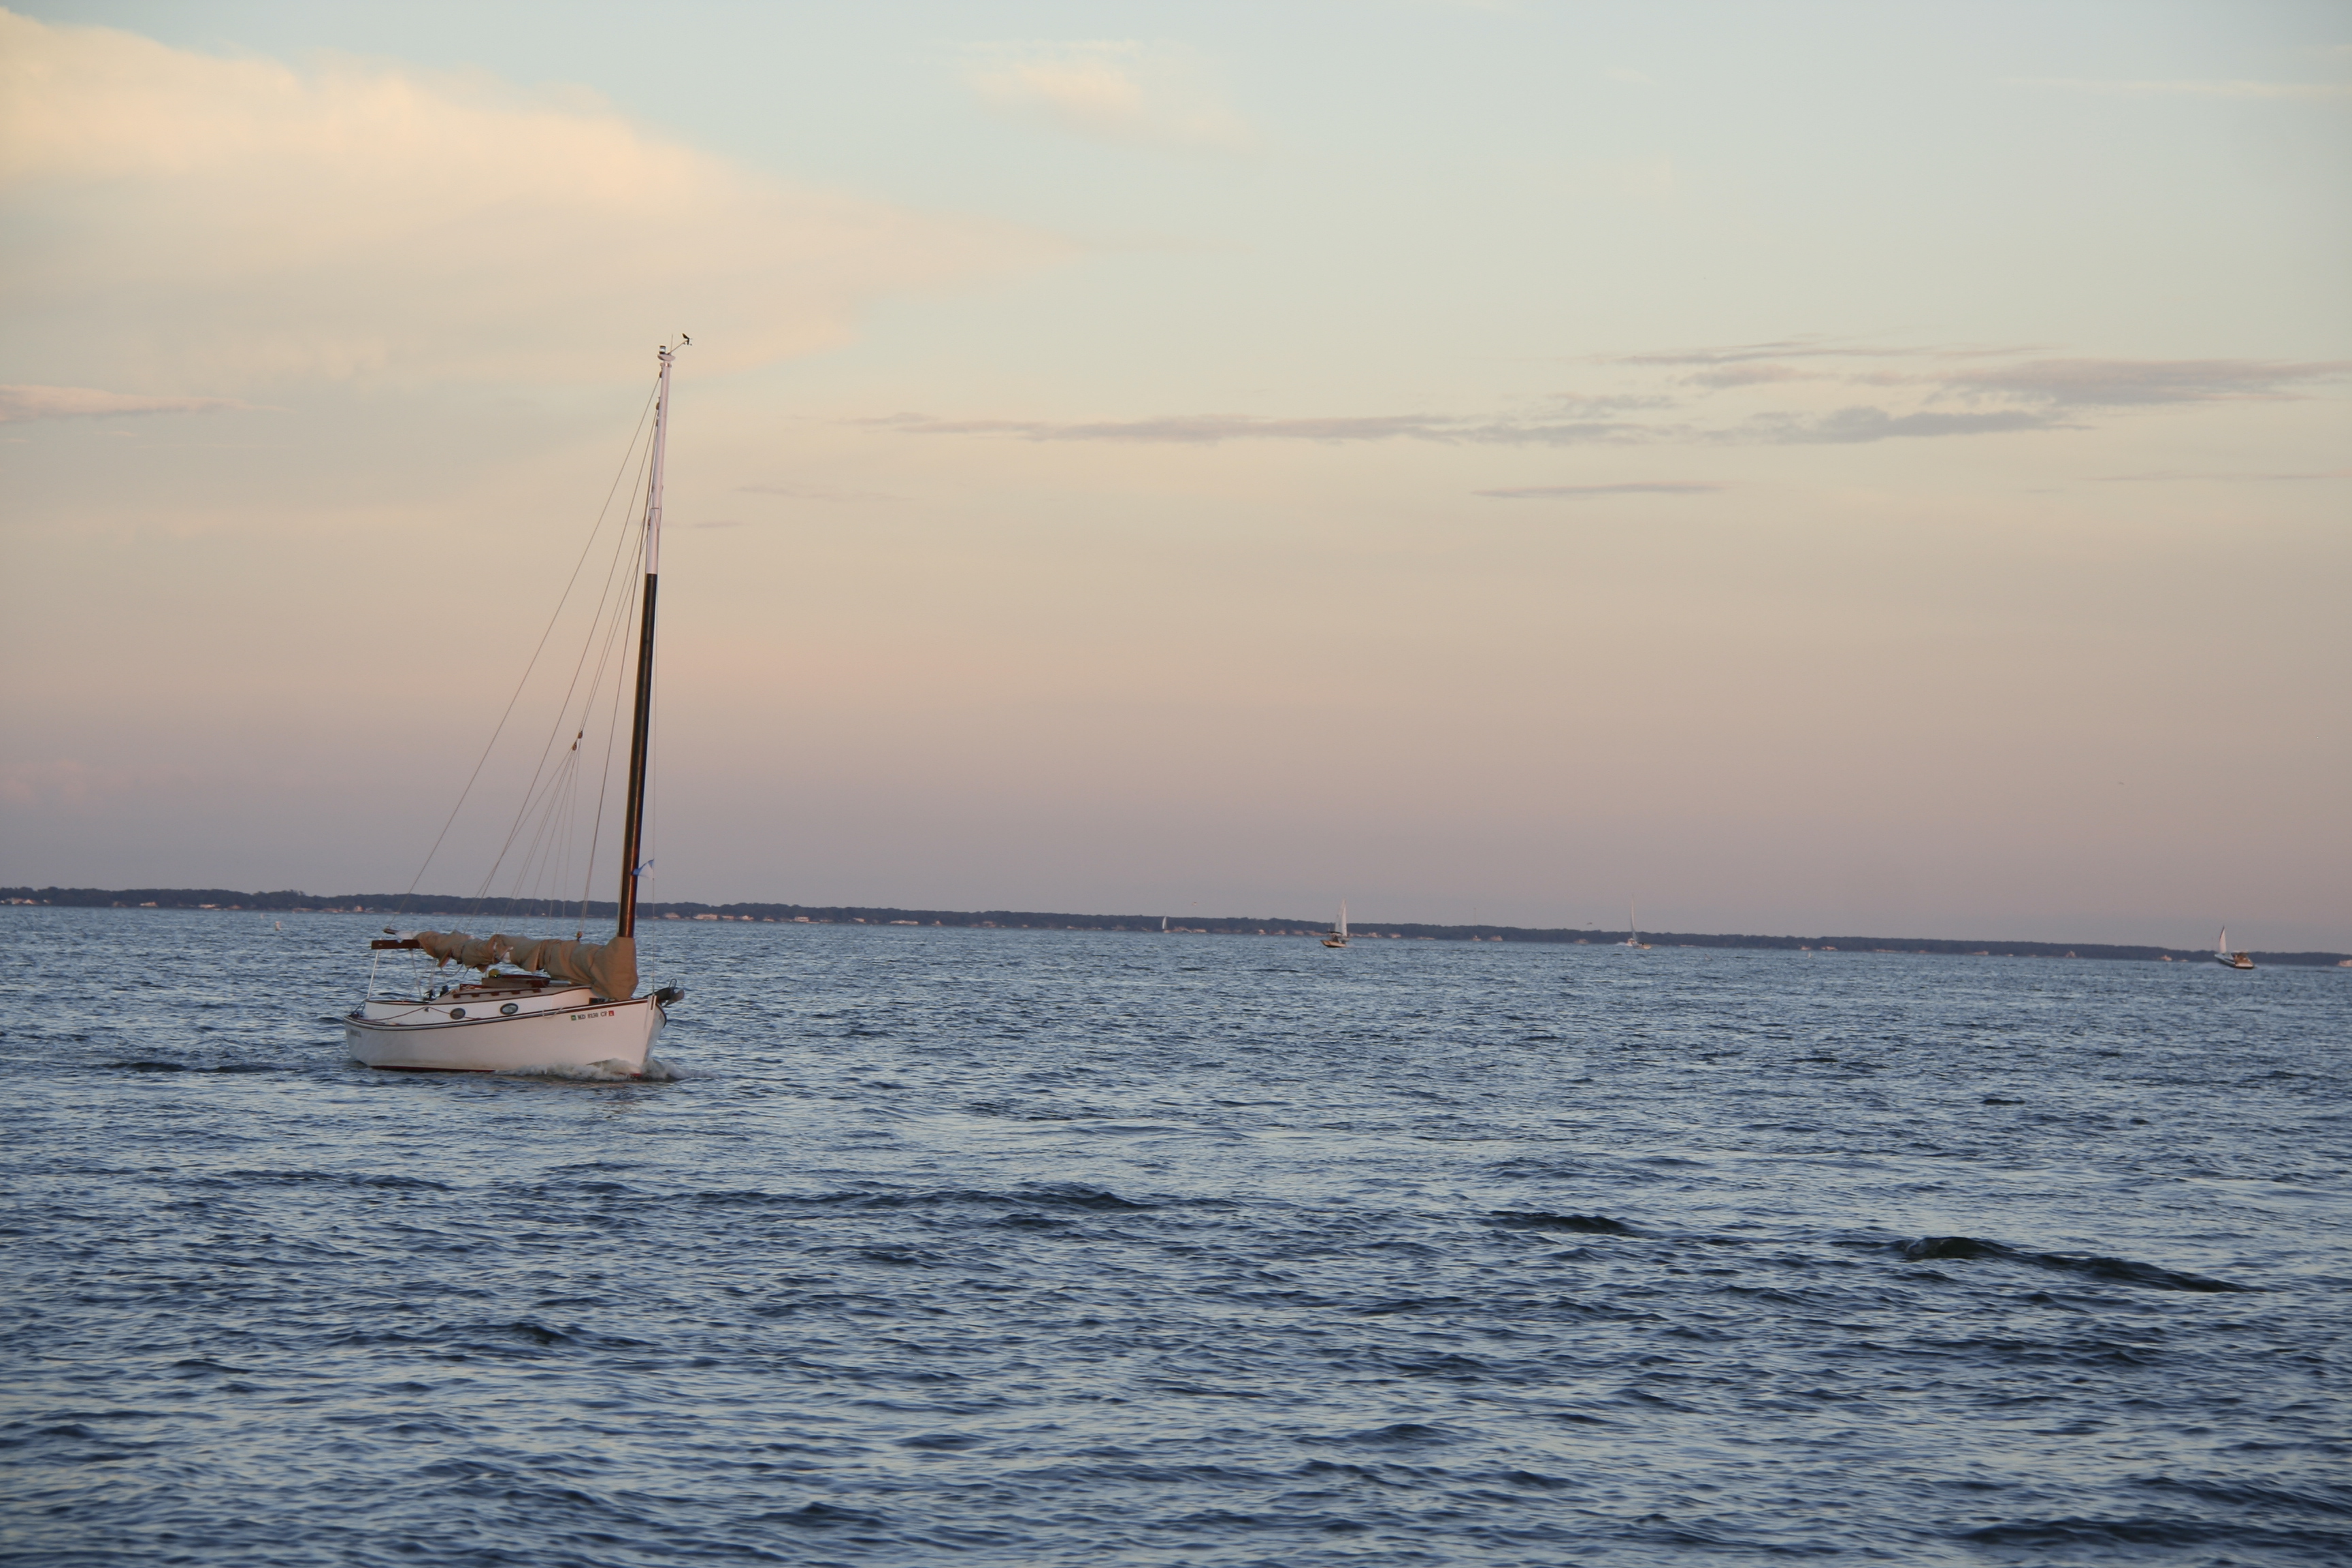 Sailboat moored on blue waters with a pink sunset